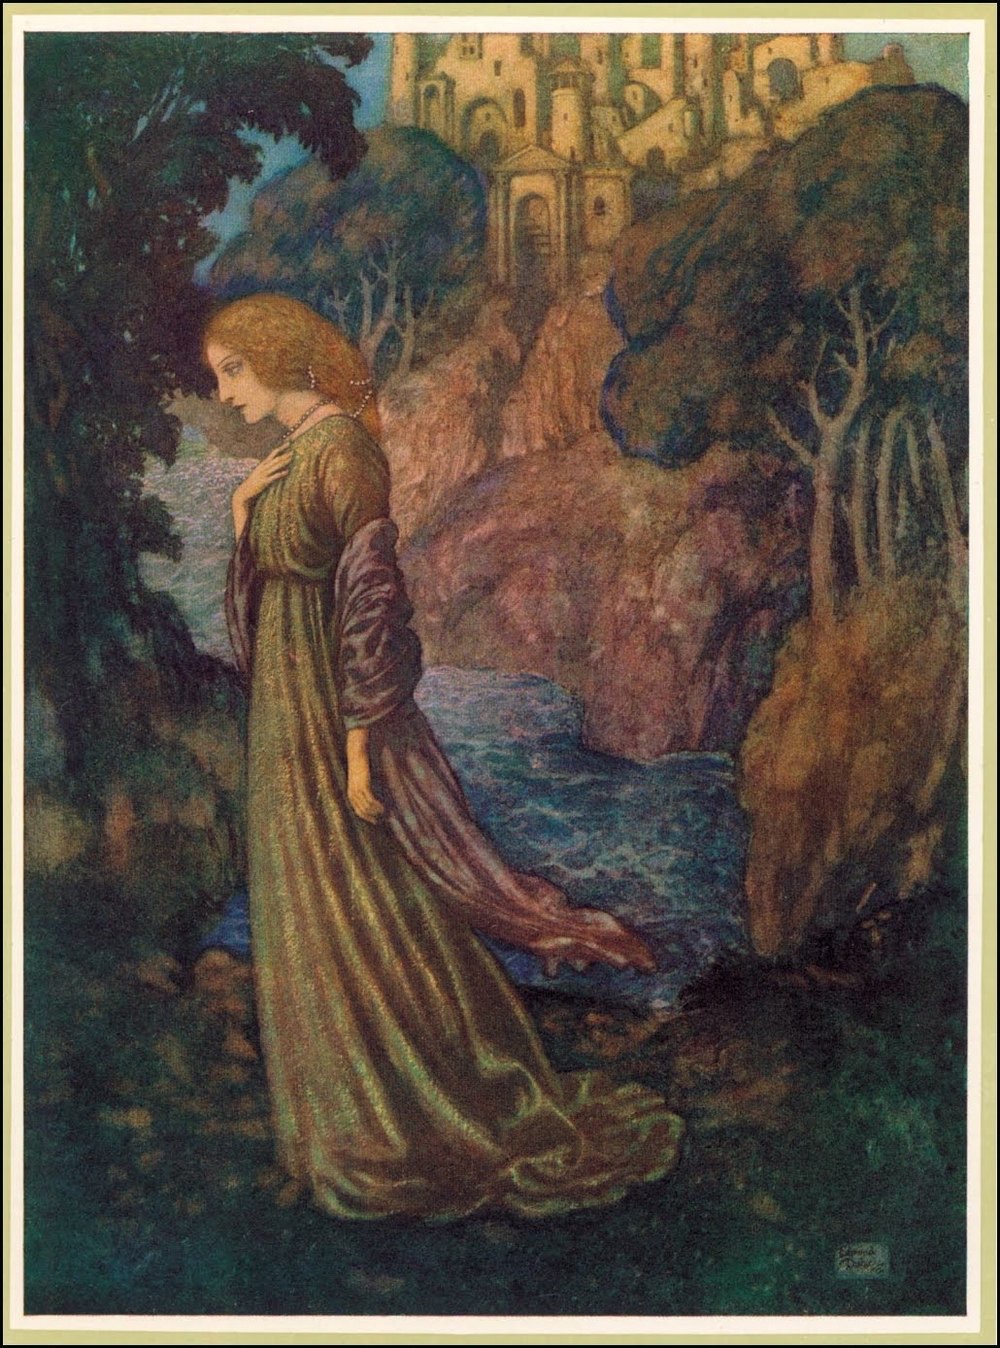 A woman standing alone by the riverside near a castle on the mountains